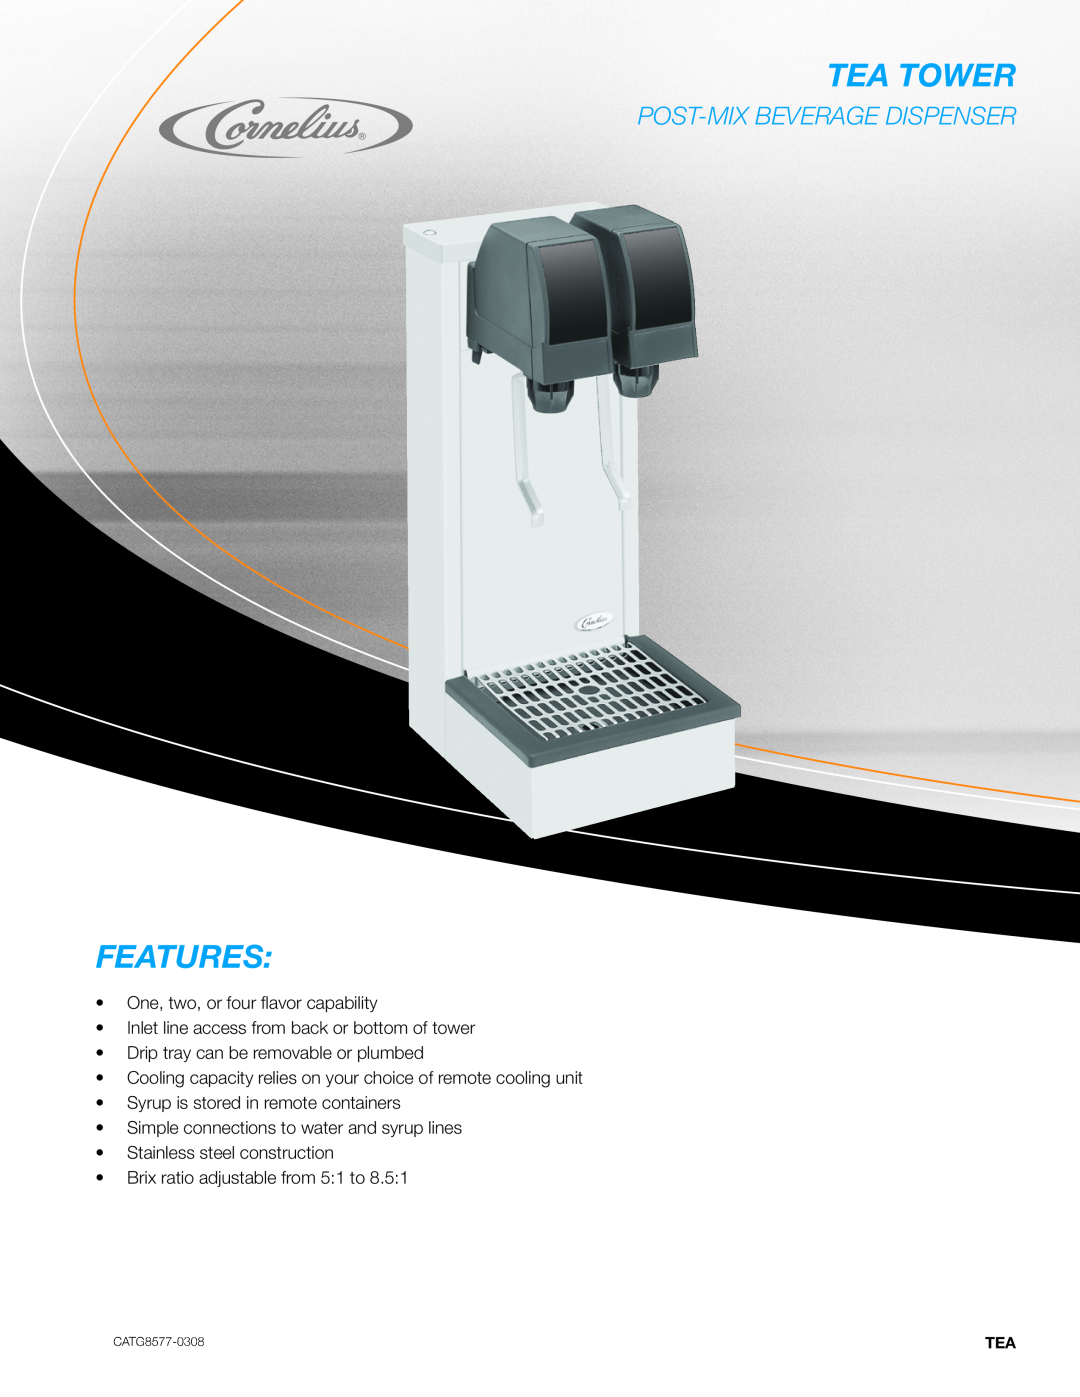 Cornelius Tea Tower manual One, two, or four ﬂ avor capability, Inlet line access from back or bottom of tower, Features 